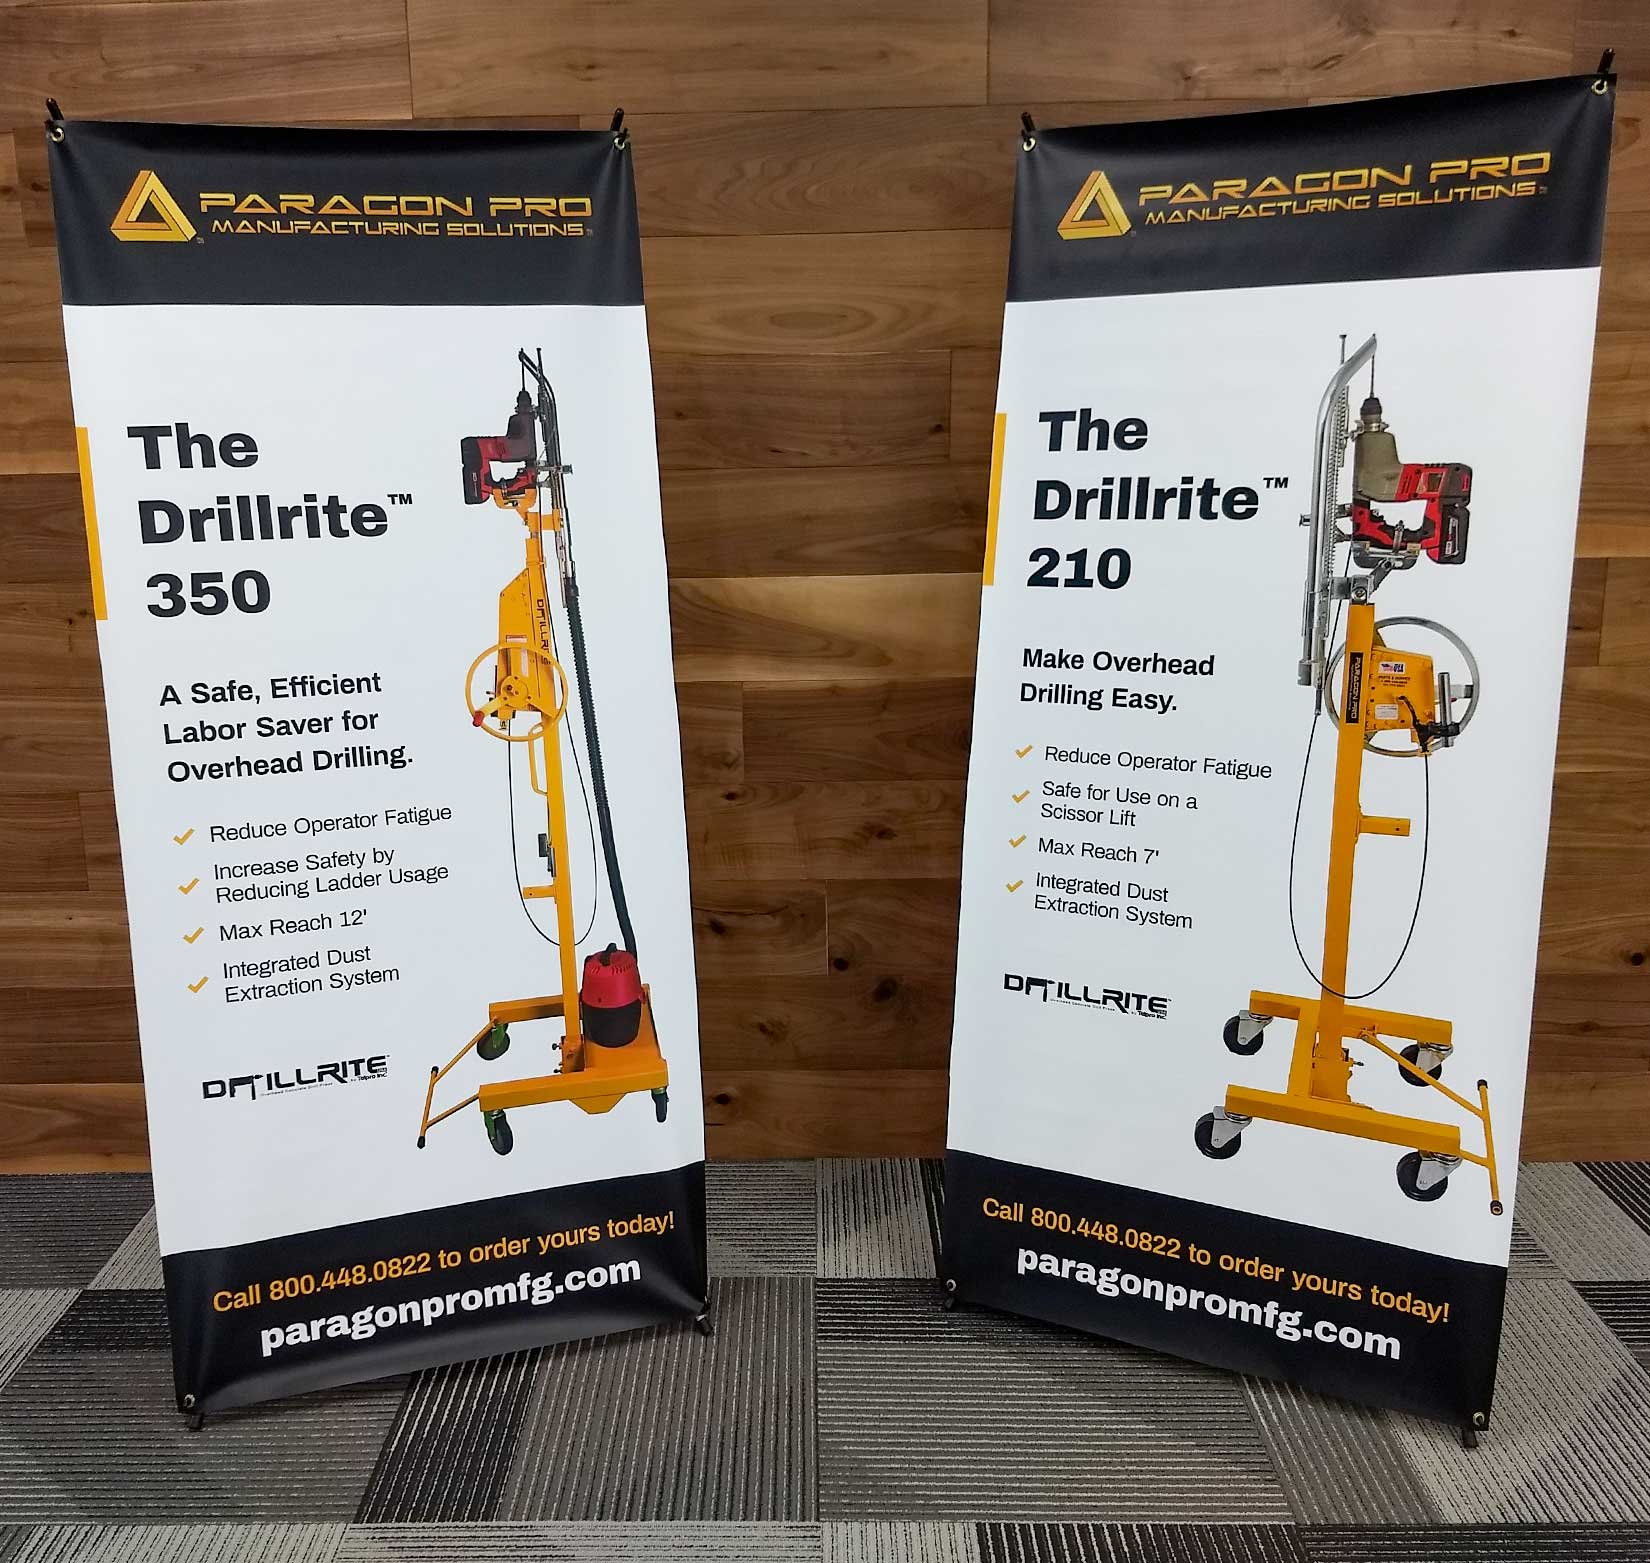 Two vertical tradeshow banners for Paragon Pro Manufacturing Solutions